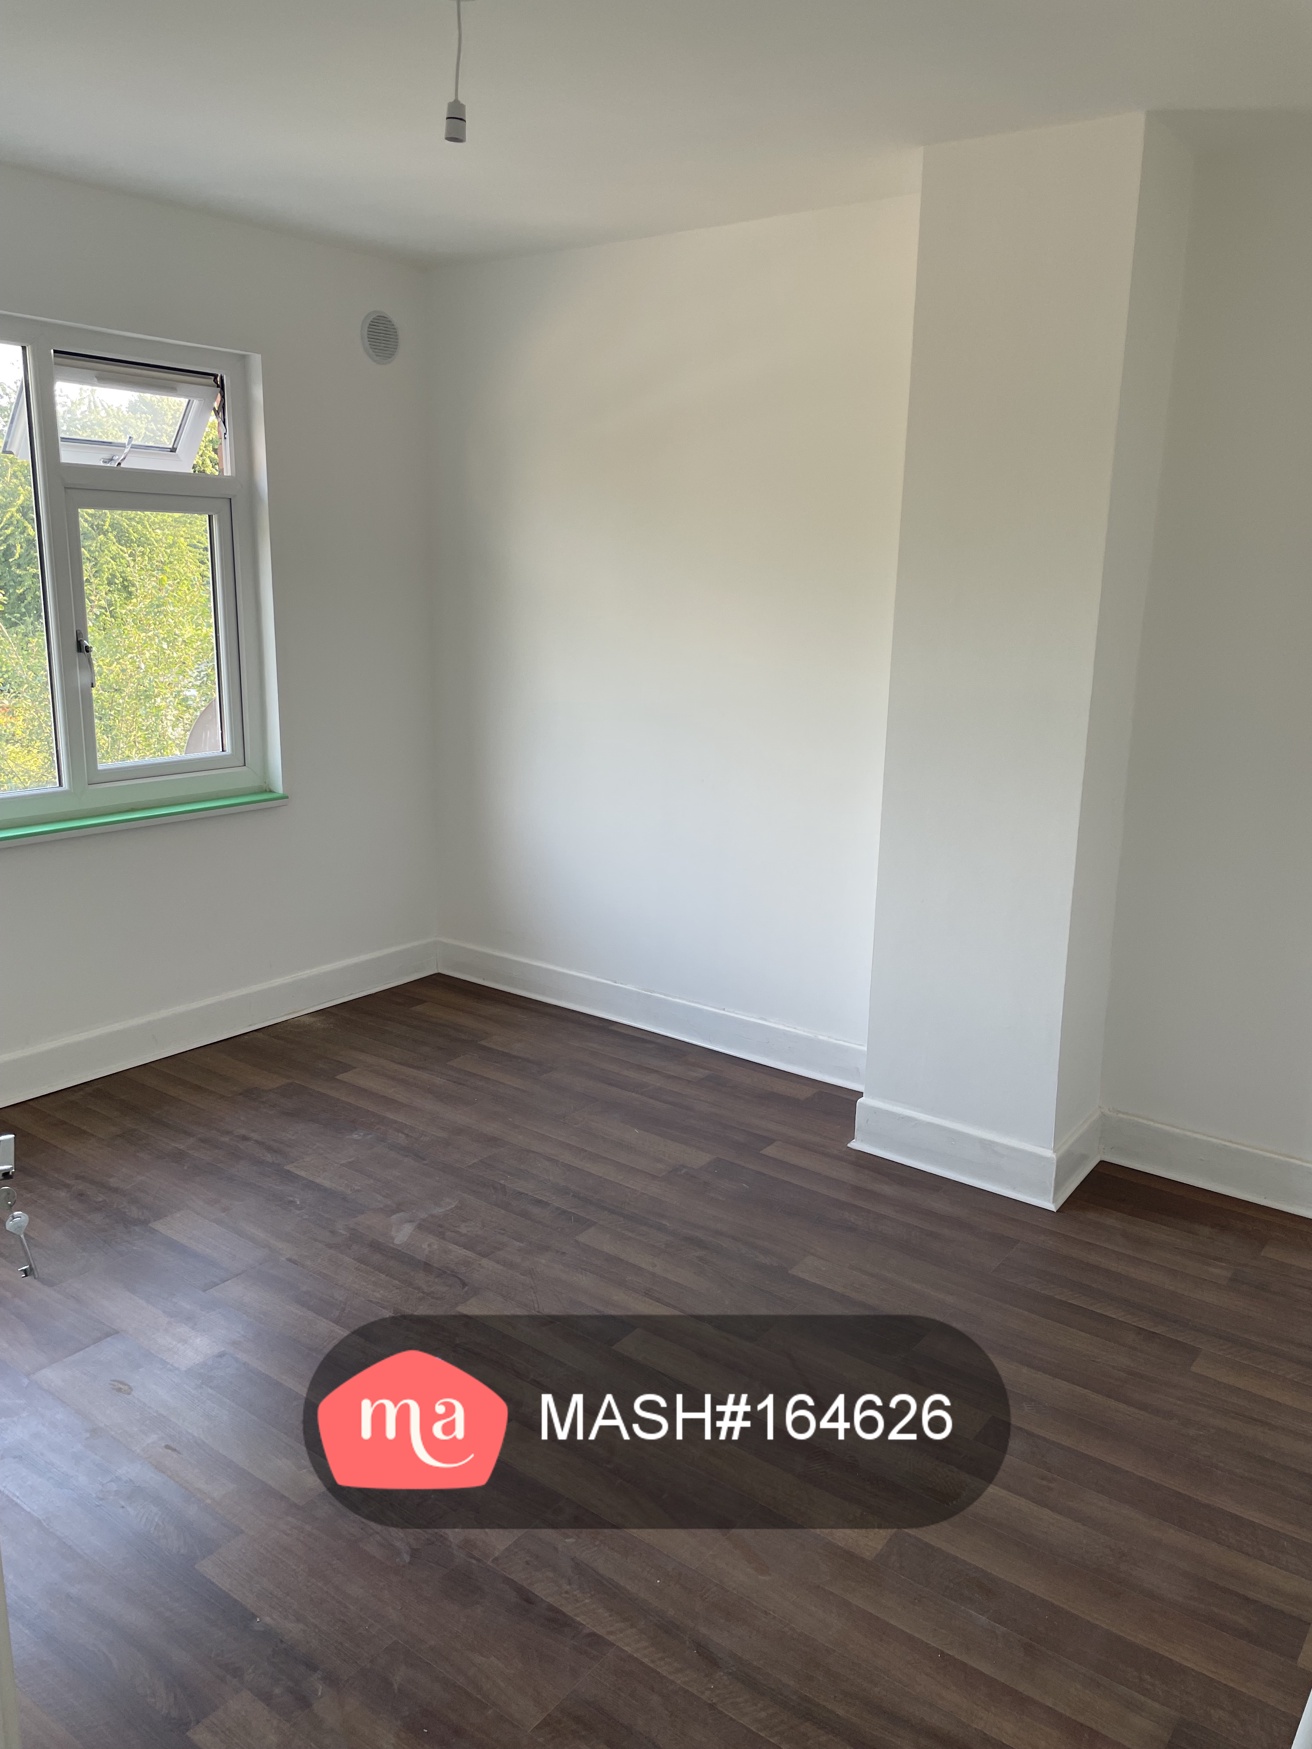 3 Bedroom Terraced to rent in Coventry - Mashroom